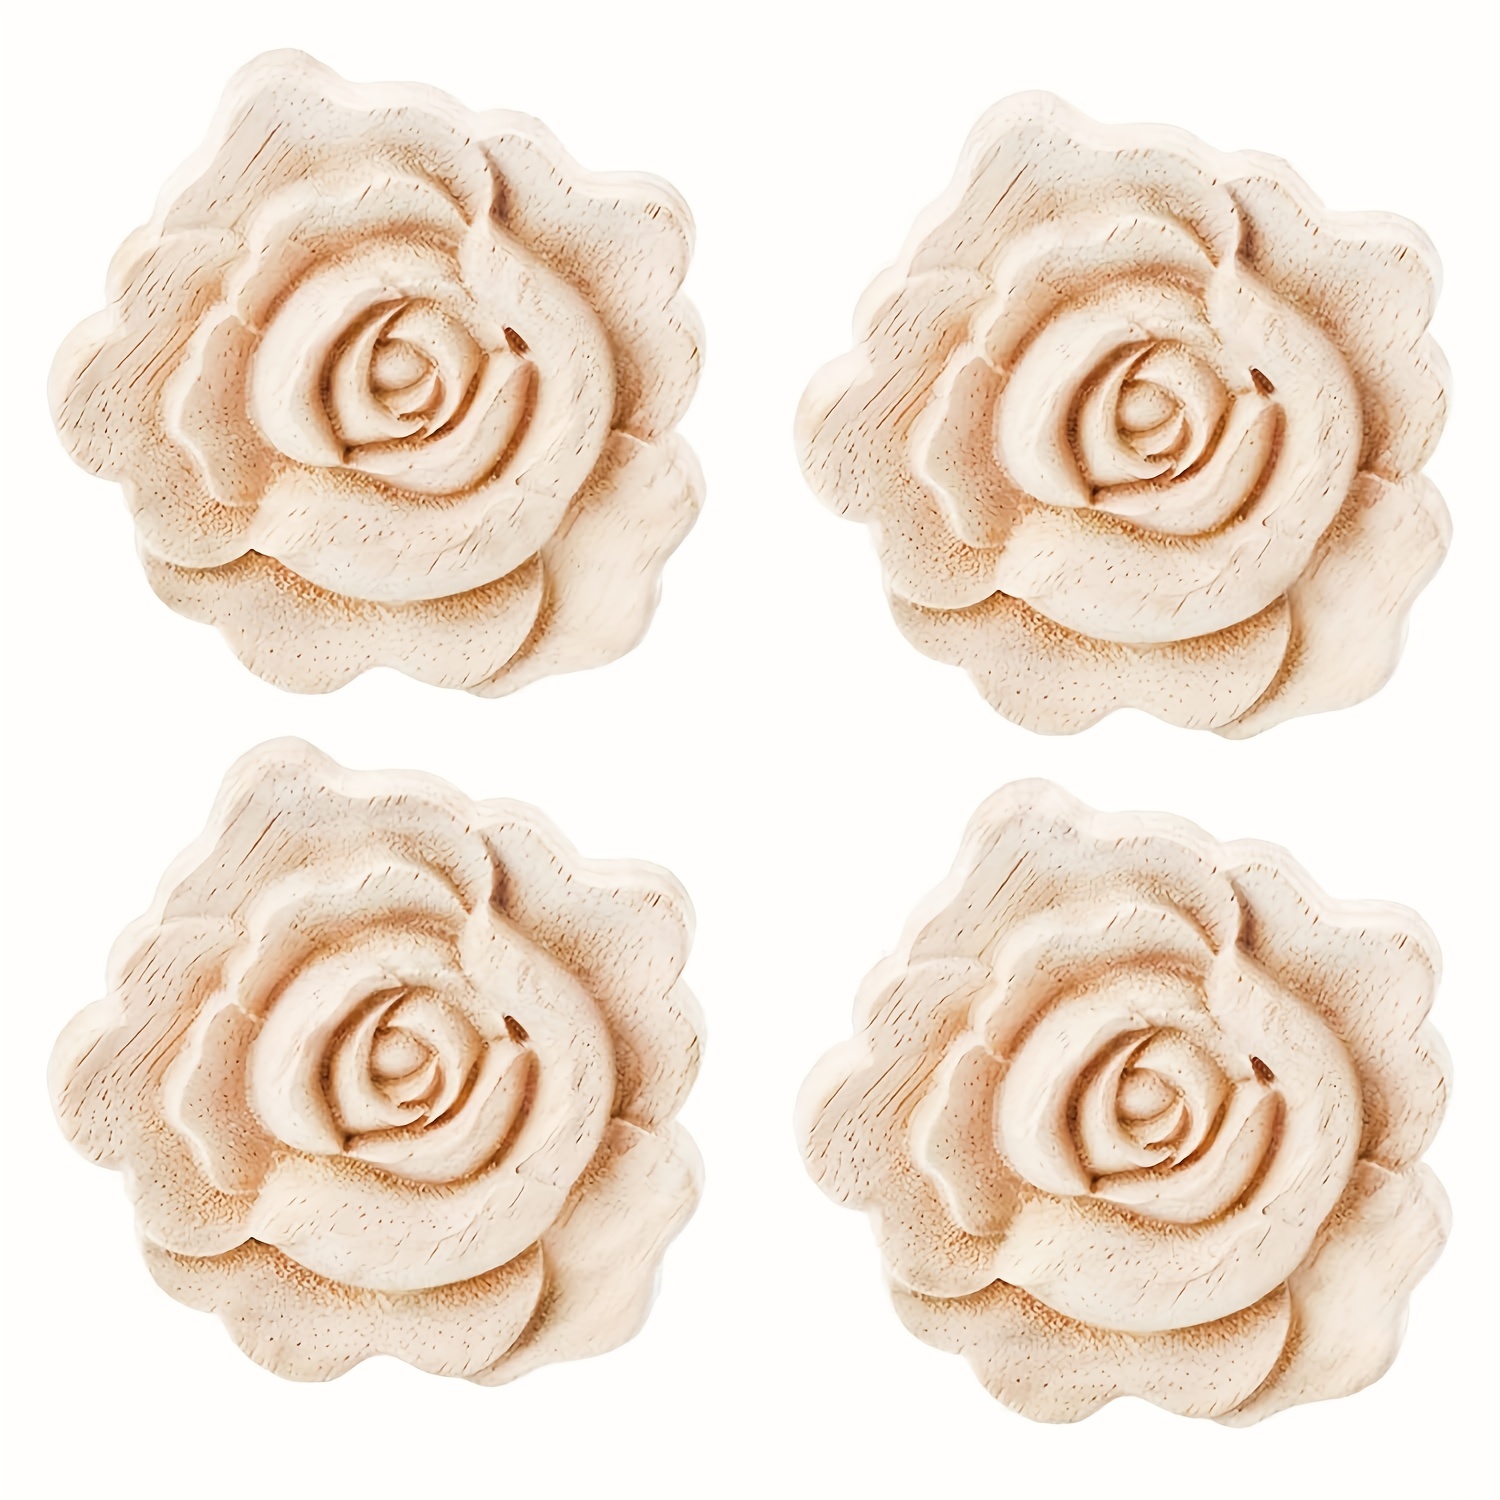 

4pcs Carved Wood Appliques Onlays, Unpainted Flower Shape Wood Carved Applique Frame Onlay For Cabinet Door Bed Wardrobe Furniture Decoration (7x7cm/2.76x2.76in)